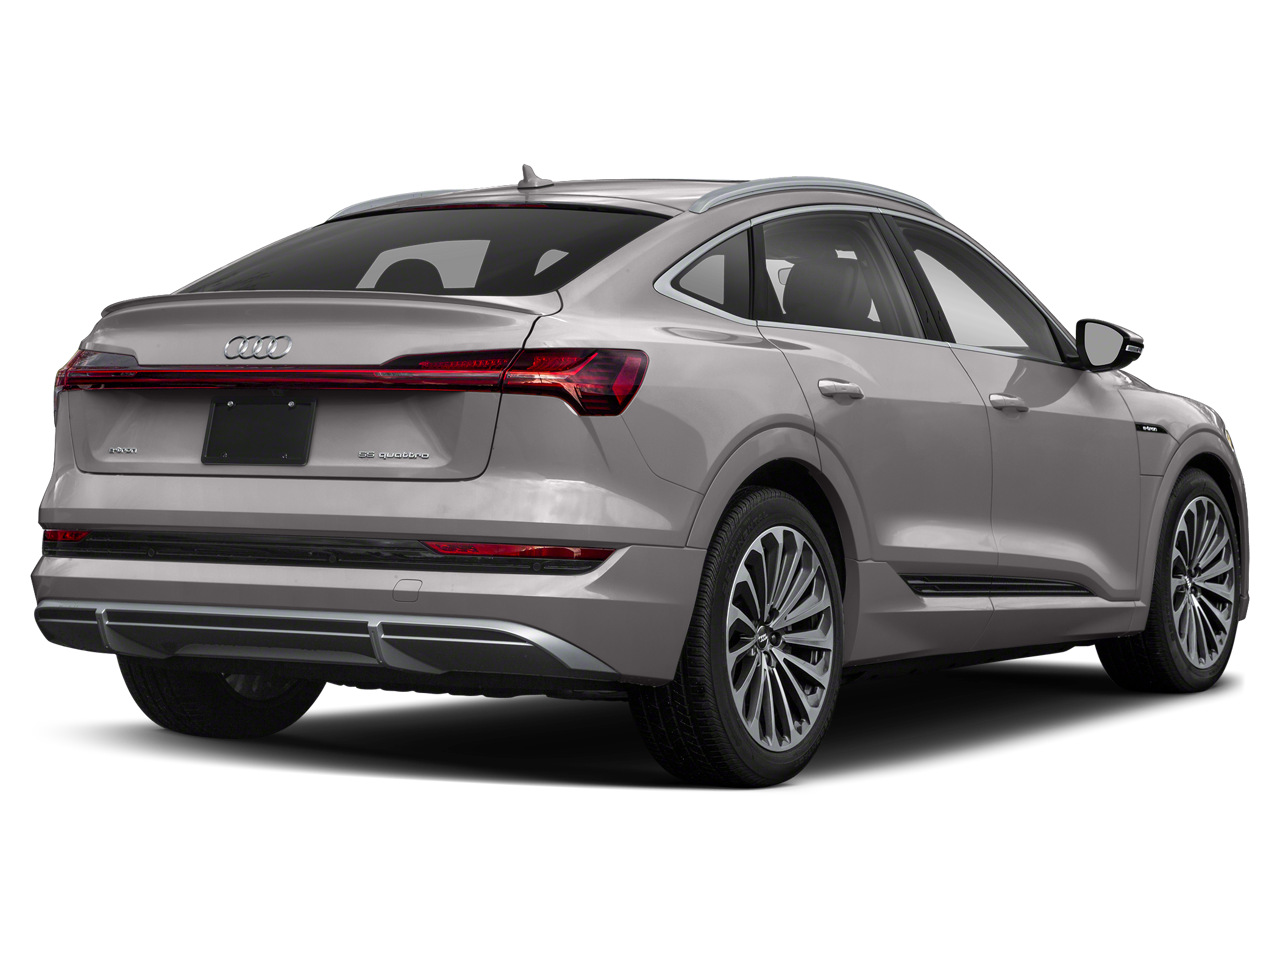 Used 2022 Audi e-tron Sportback Premium Plus with VIN WA12ABGEXNB011189 for sale in Crystal Lake, IL